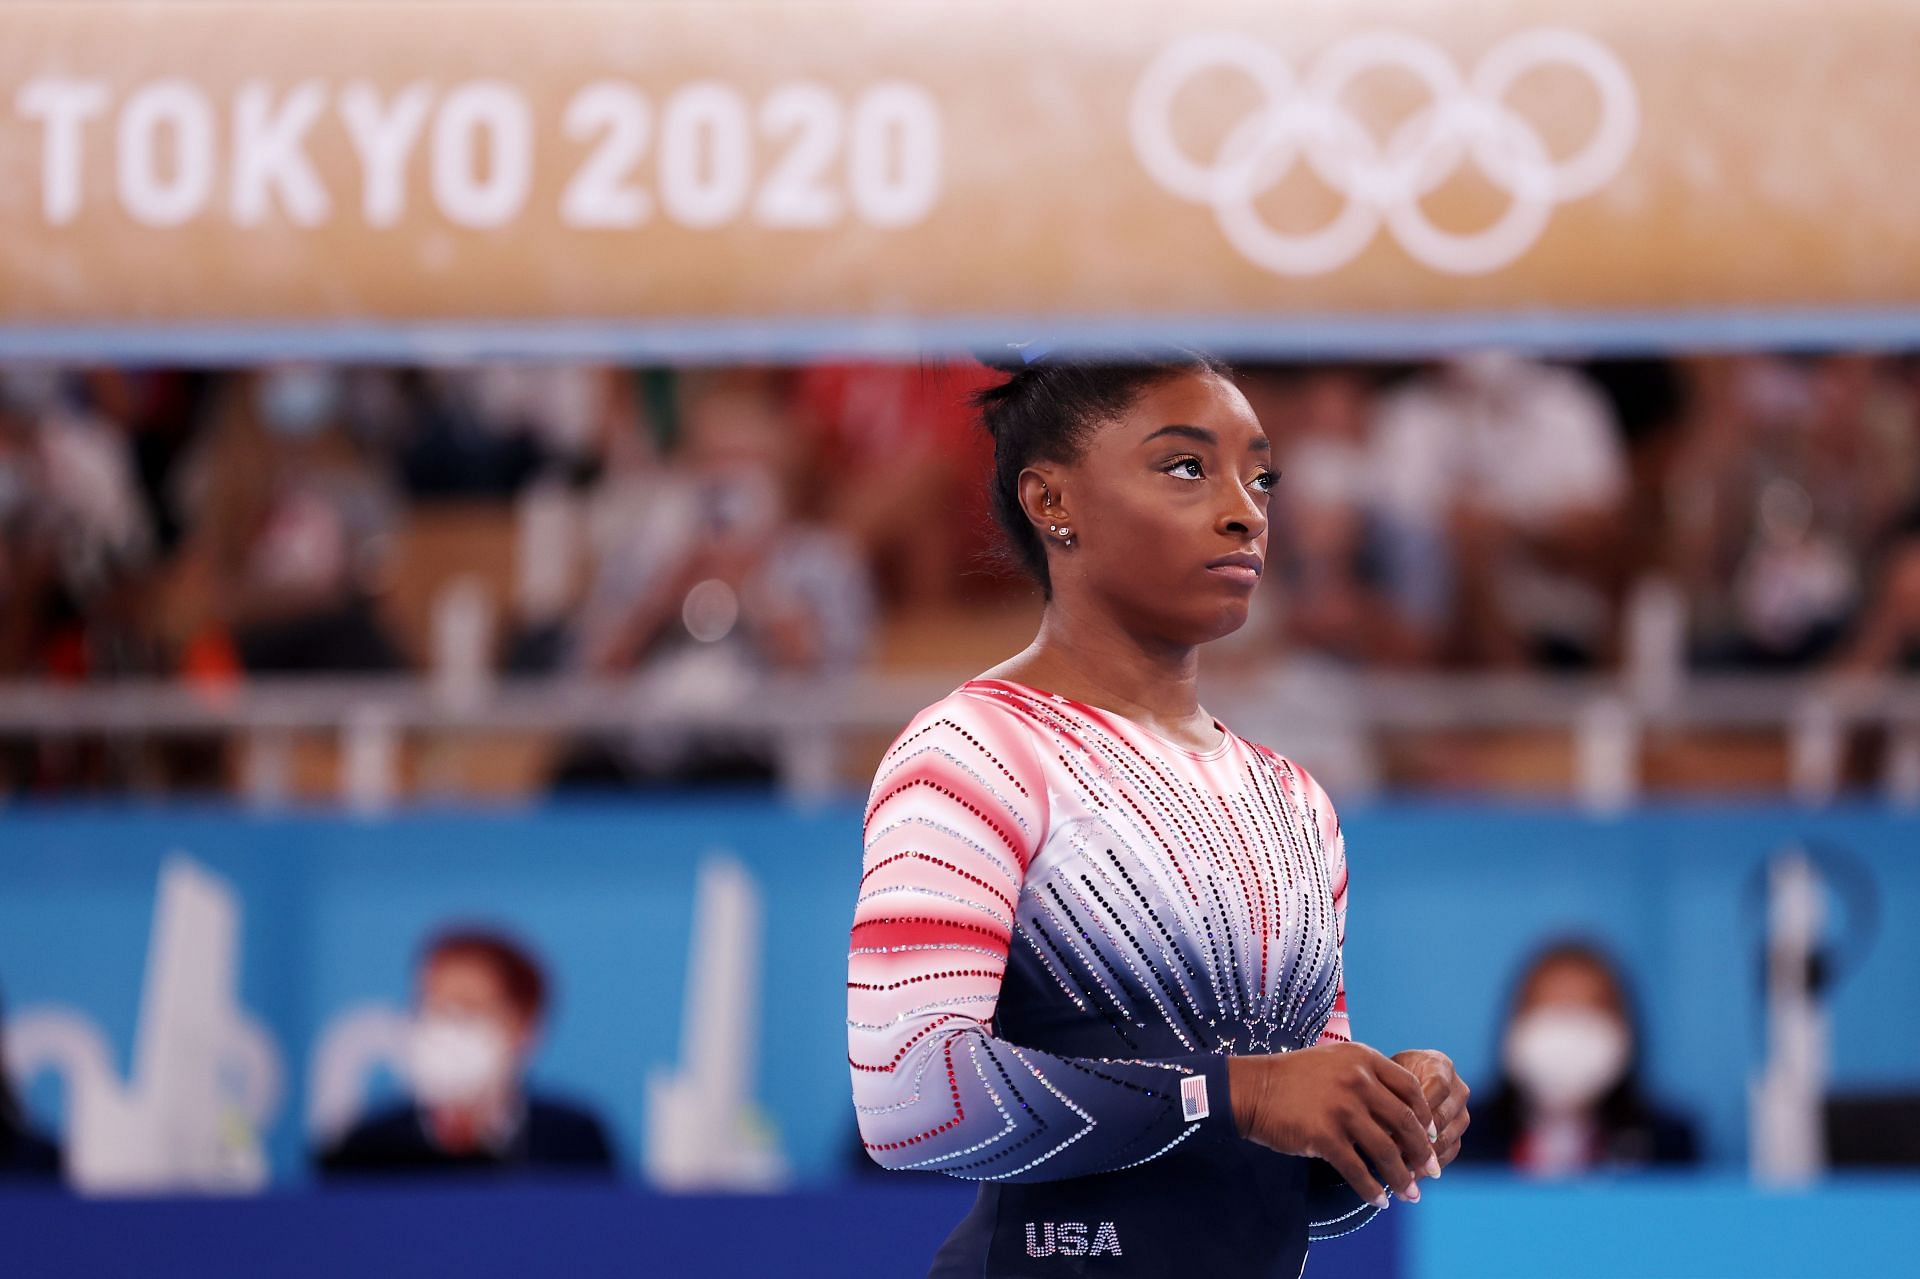 How much money did Simone Biles lose for pulling out of Olympics?